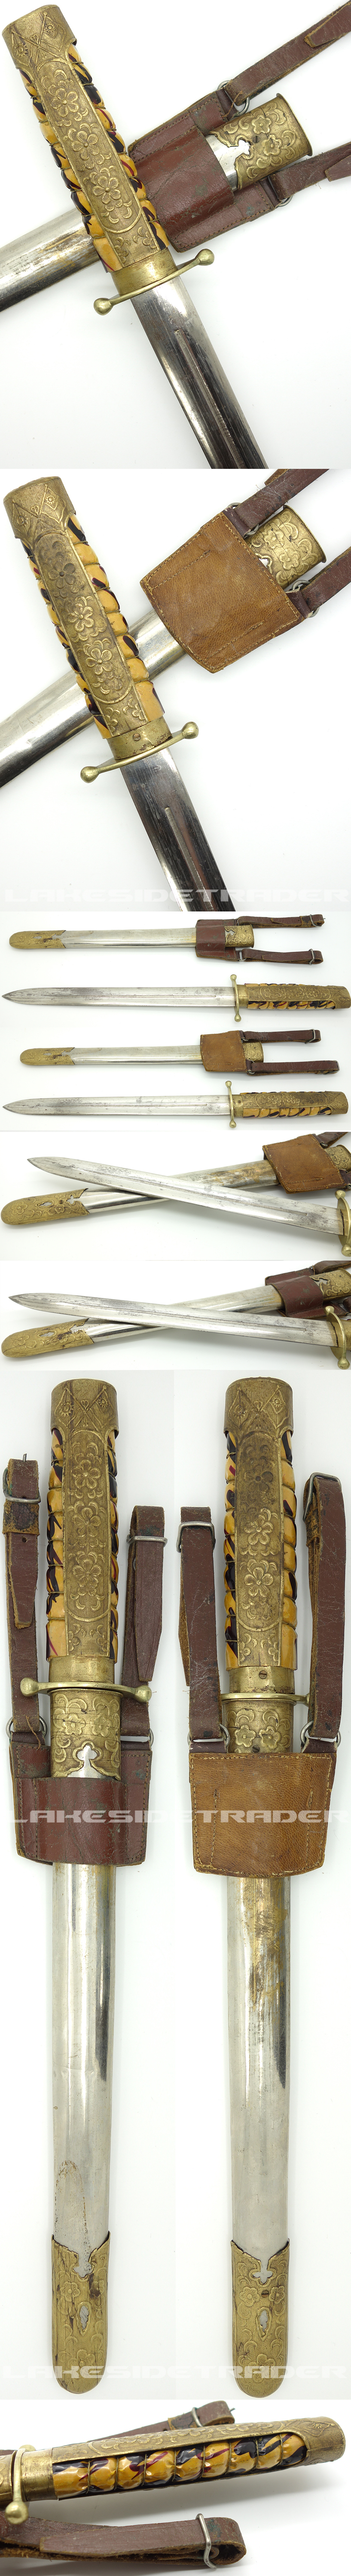 Chinese Army Dagger